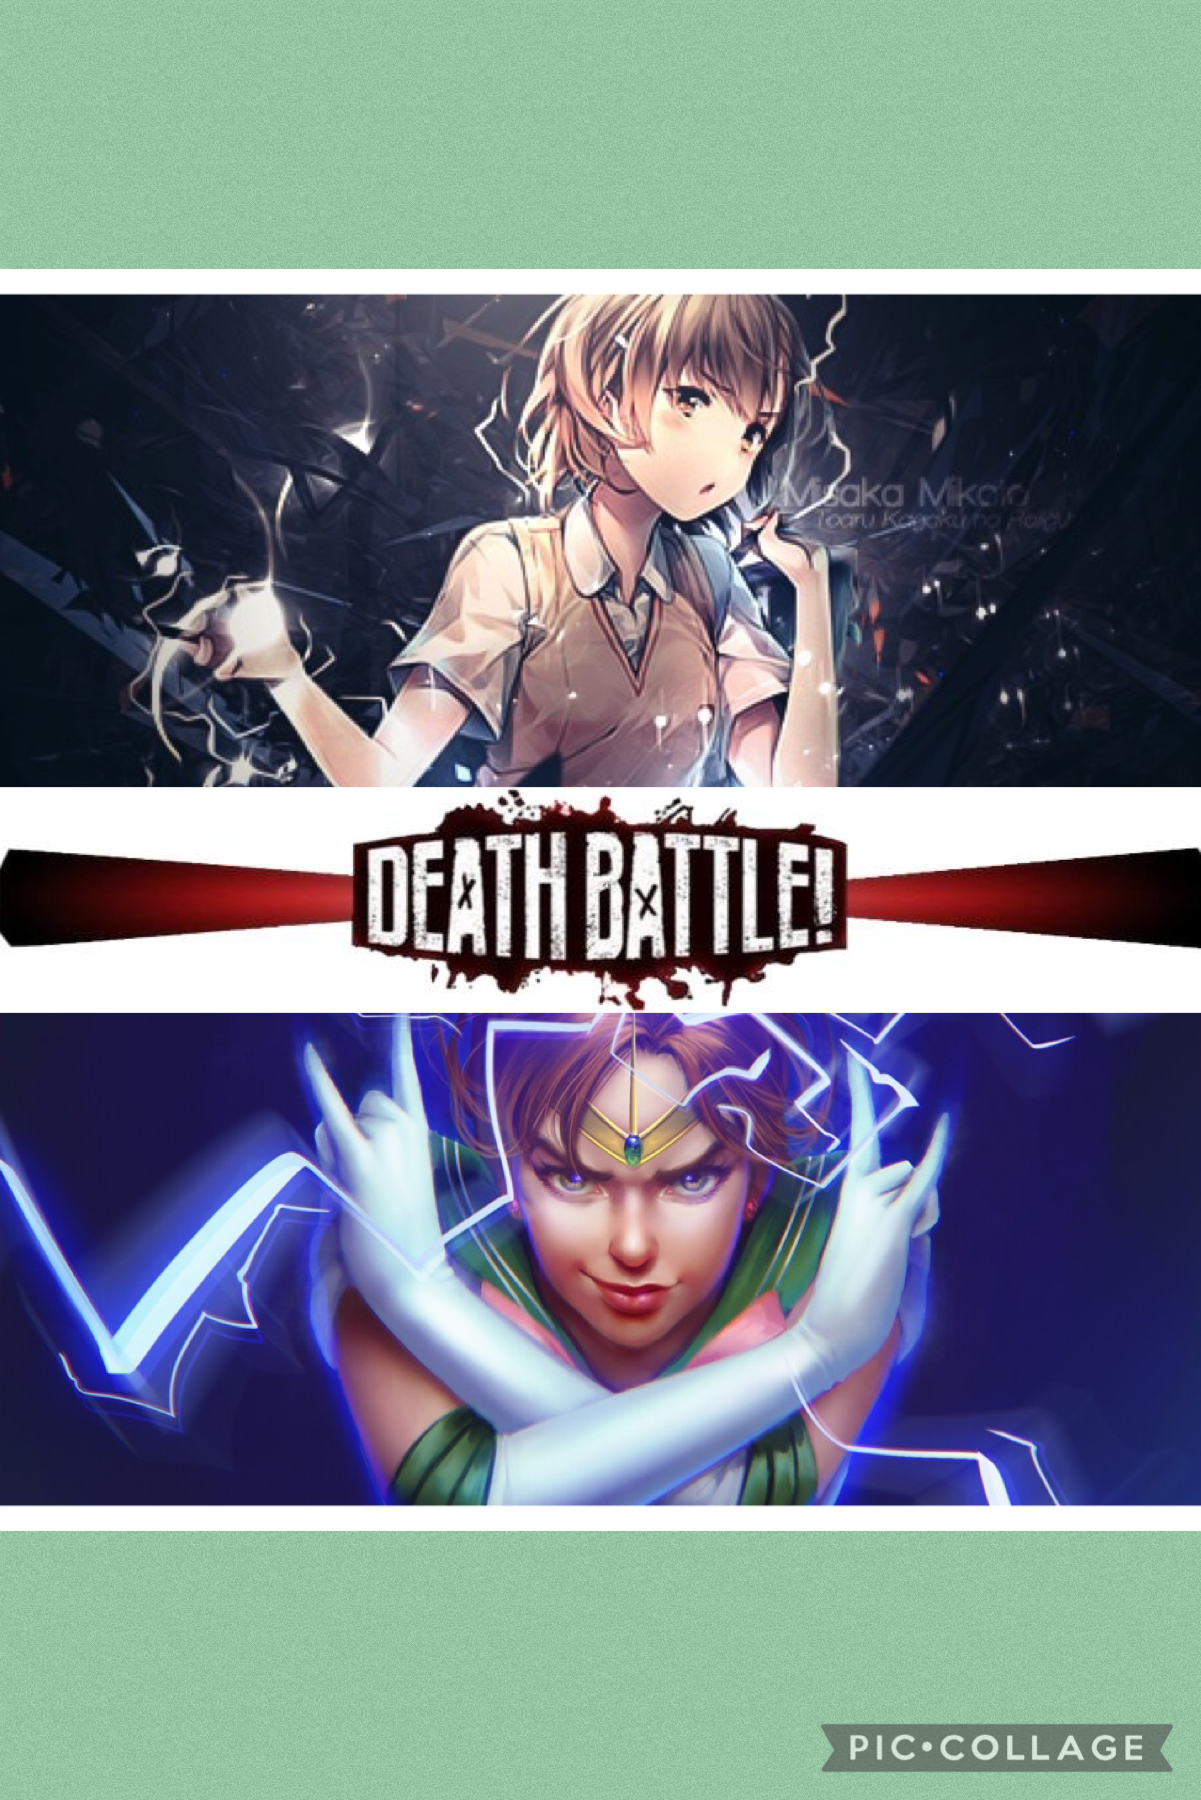 Mikasa Mikoto versus sailor Jupiter who would win between these female livewires